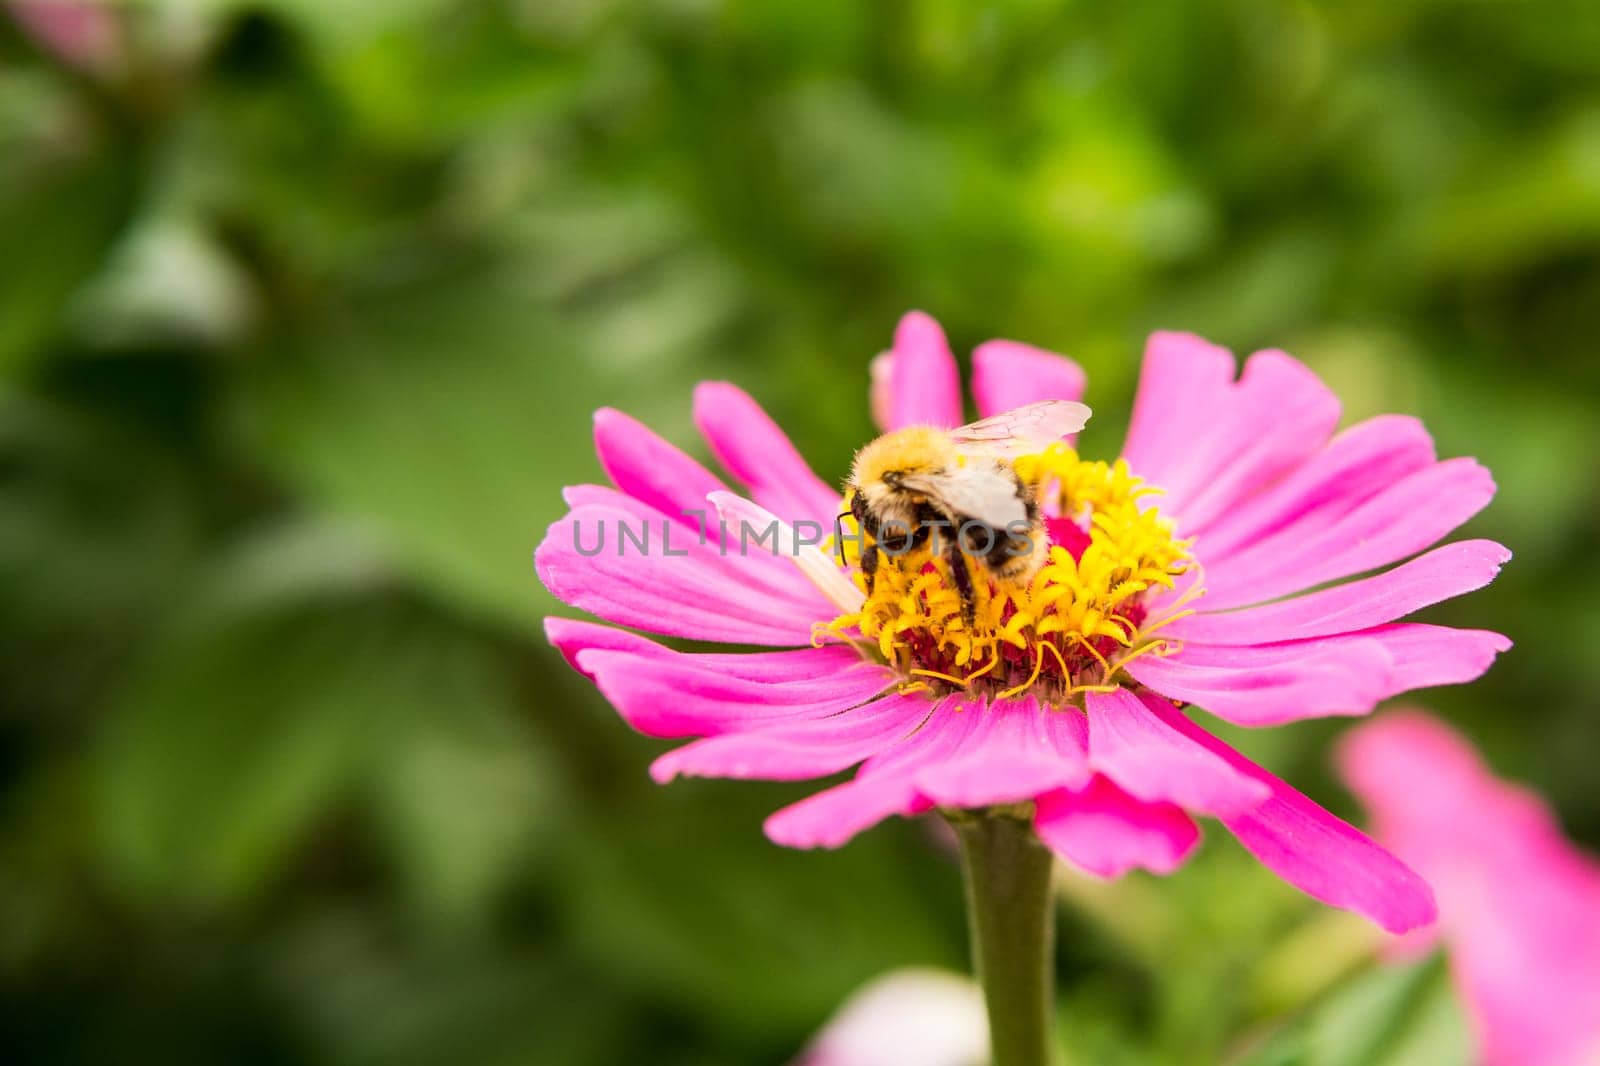 Beautiful pink flowers growing in the garden. Gardening concept, close-up. The flower is pollinated by a bumblebee. by Annu1tochka